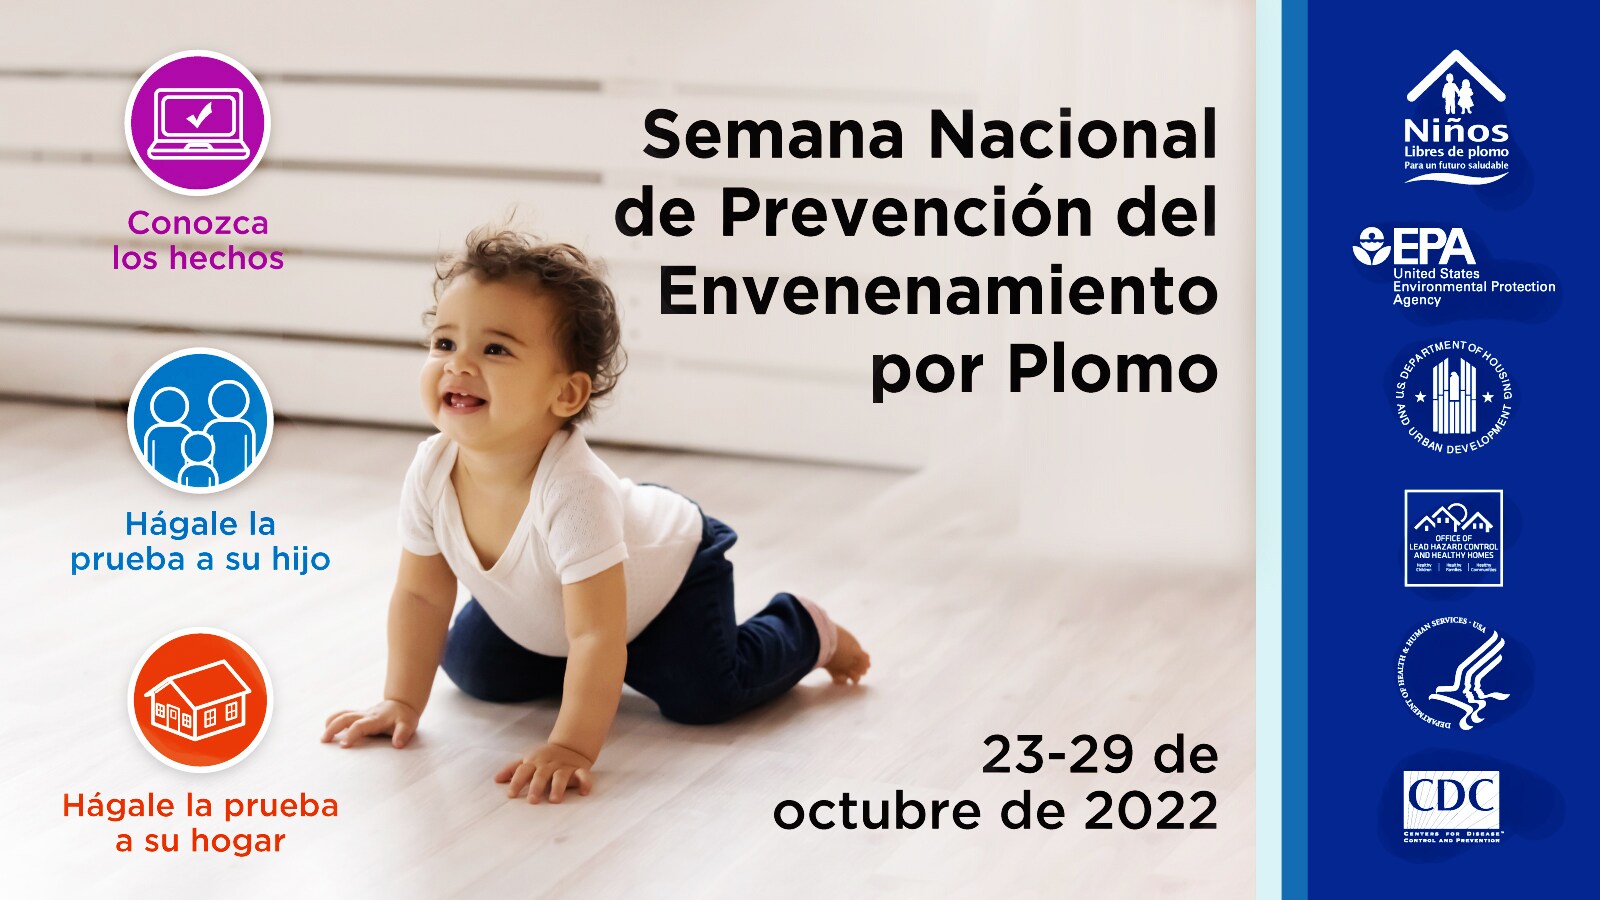 Young child on floor NLPPW social media image in Spanish